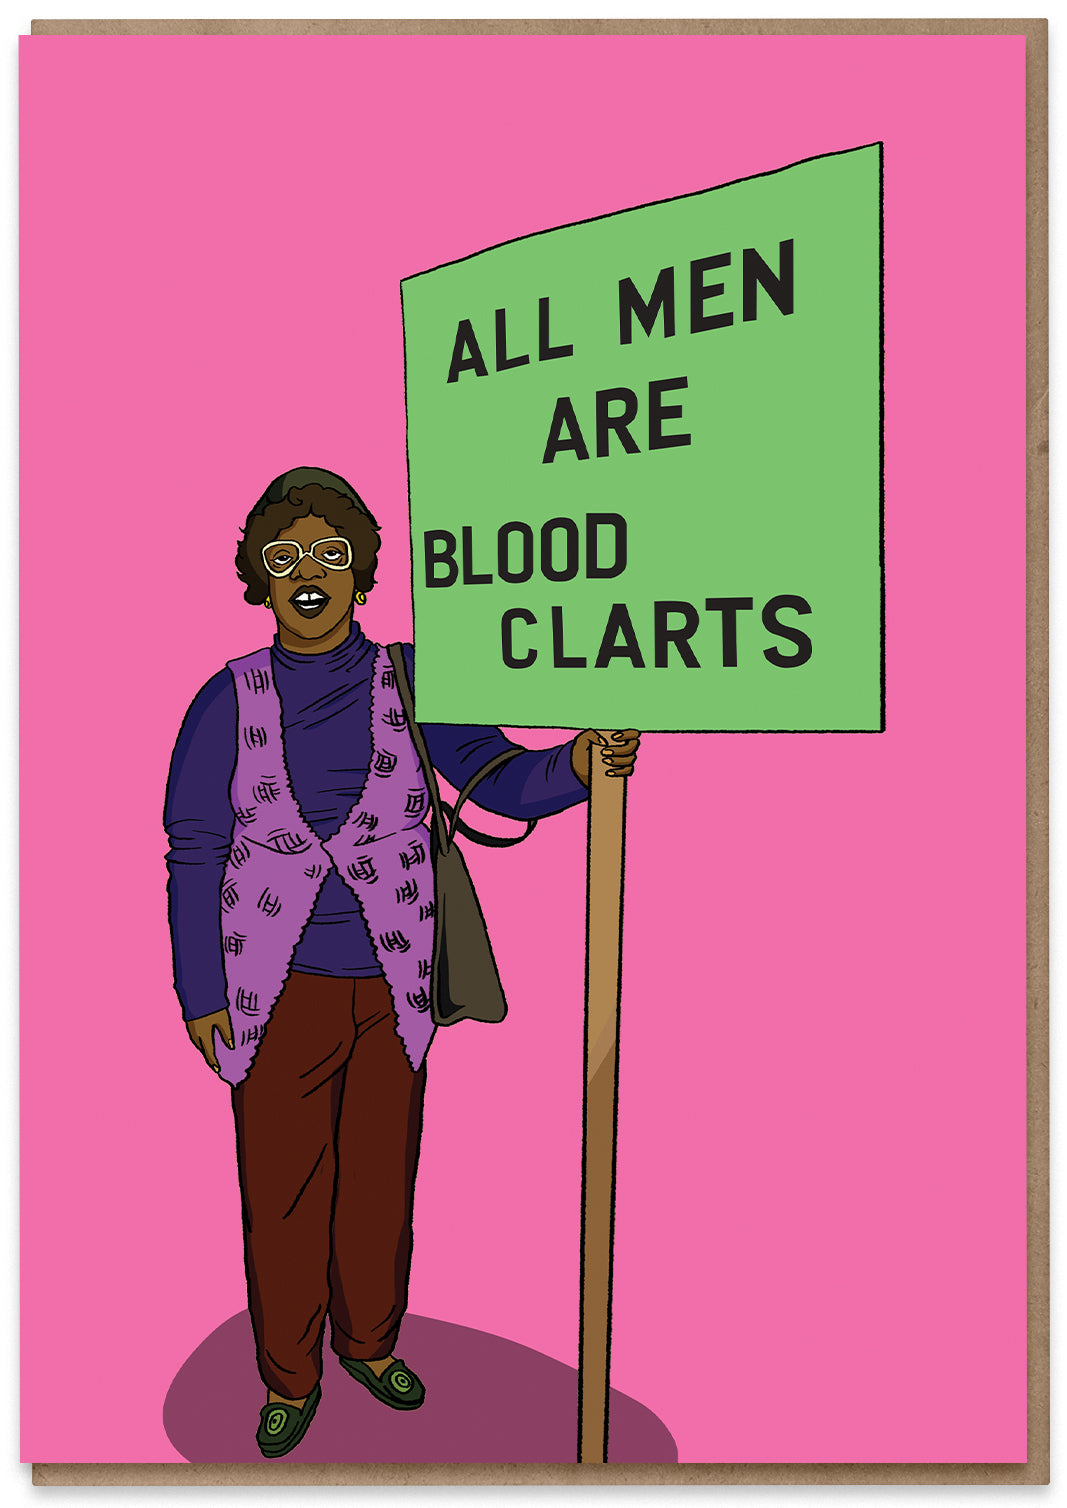 All Men are Bloodclarts (Allegedly)